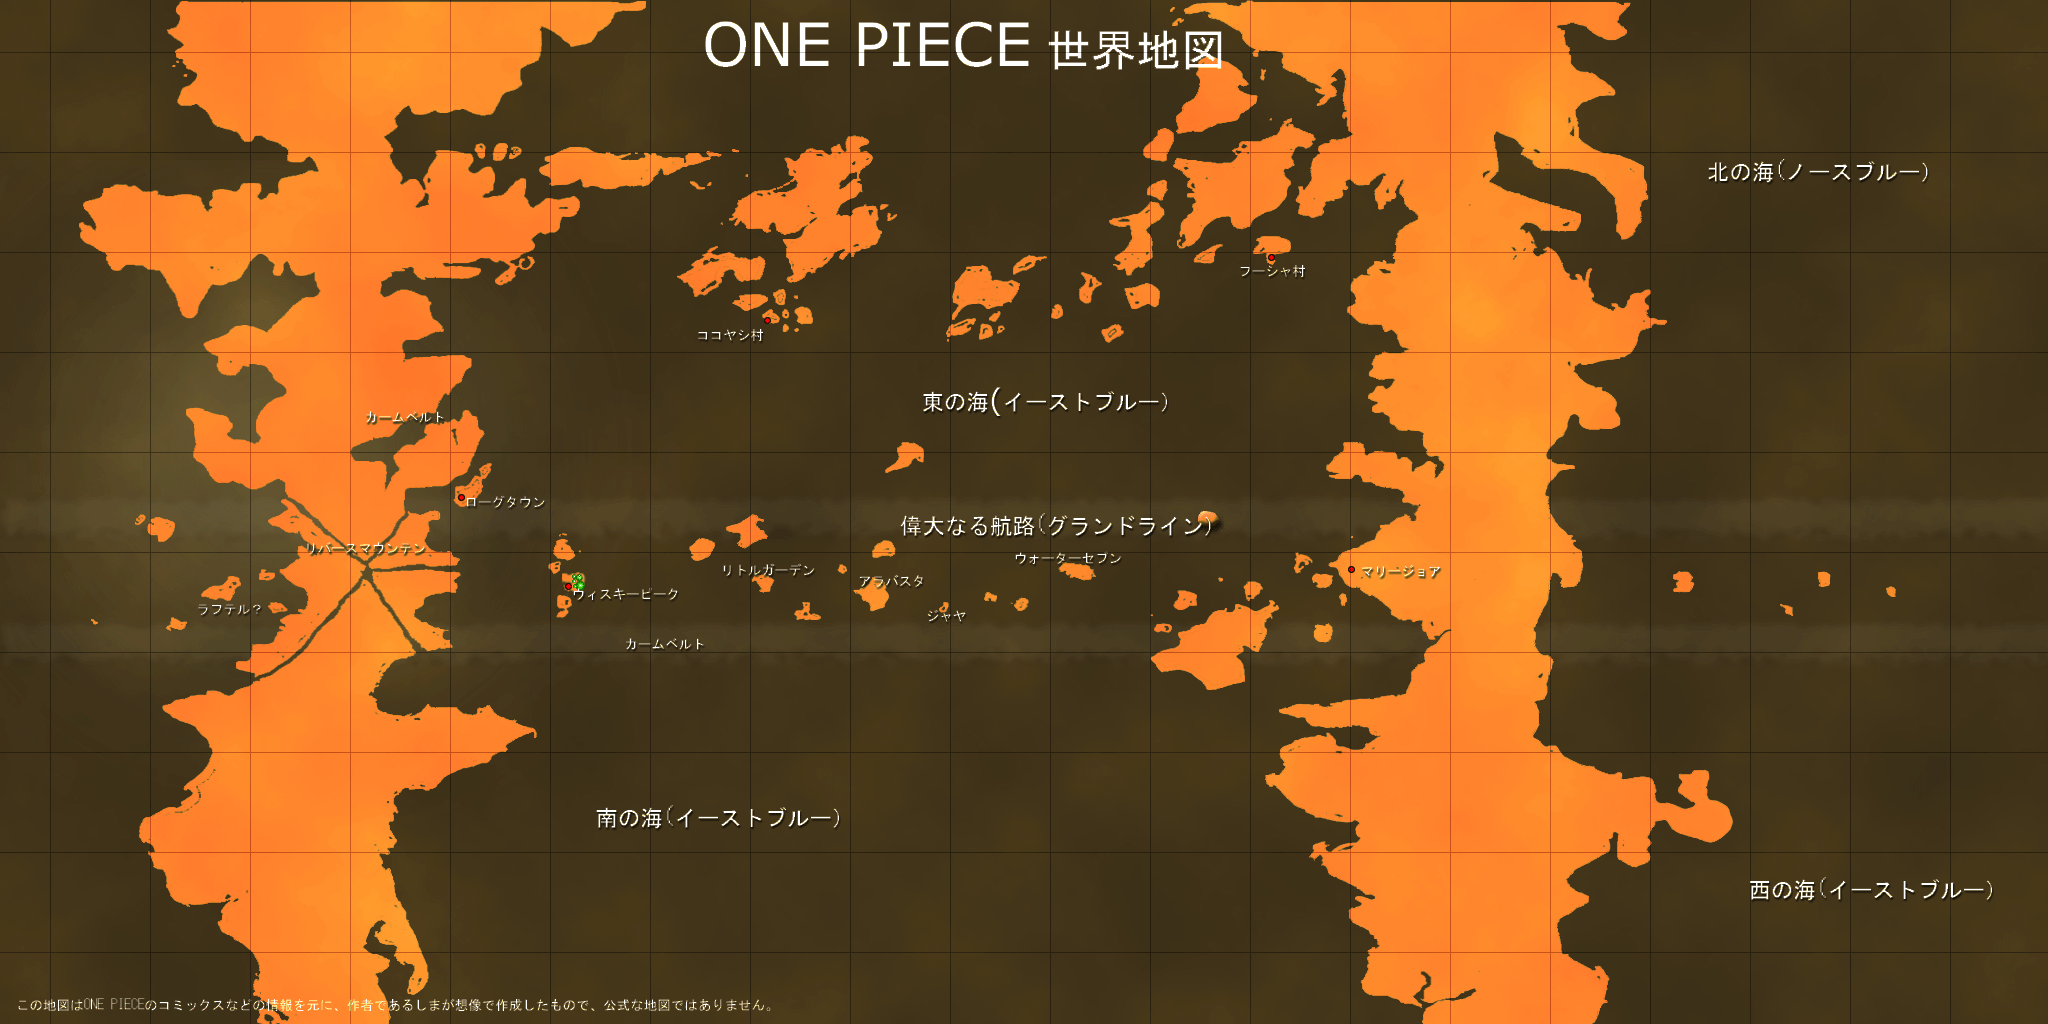 One Piece: Grand Line & Map Explained